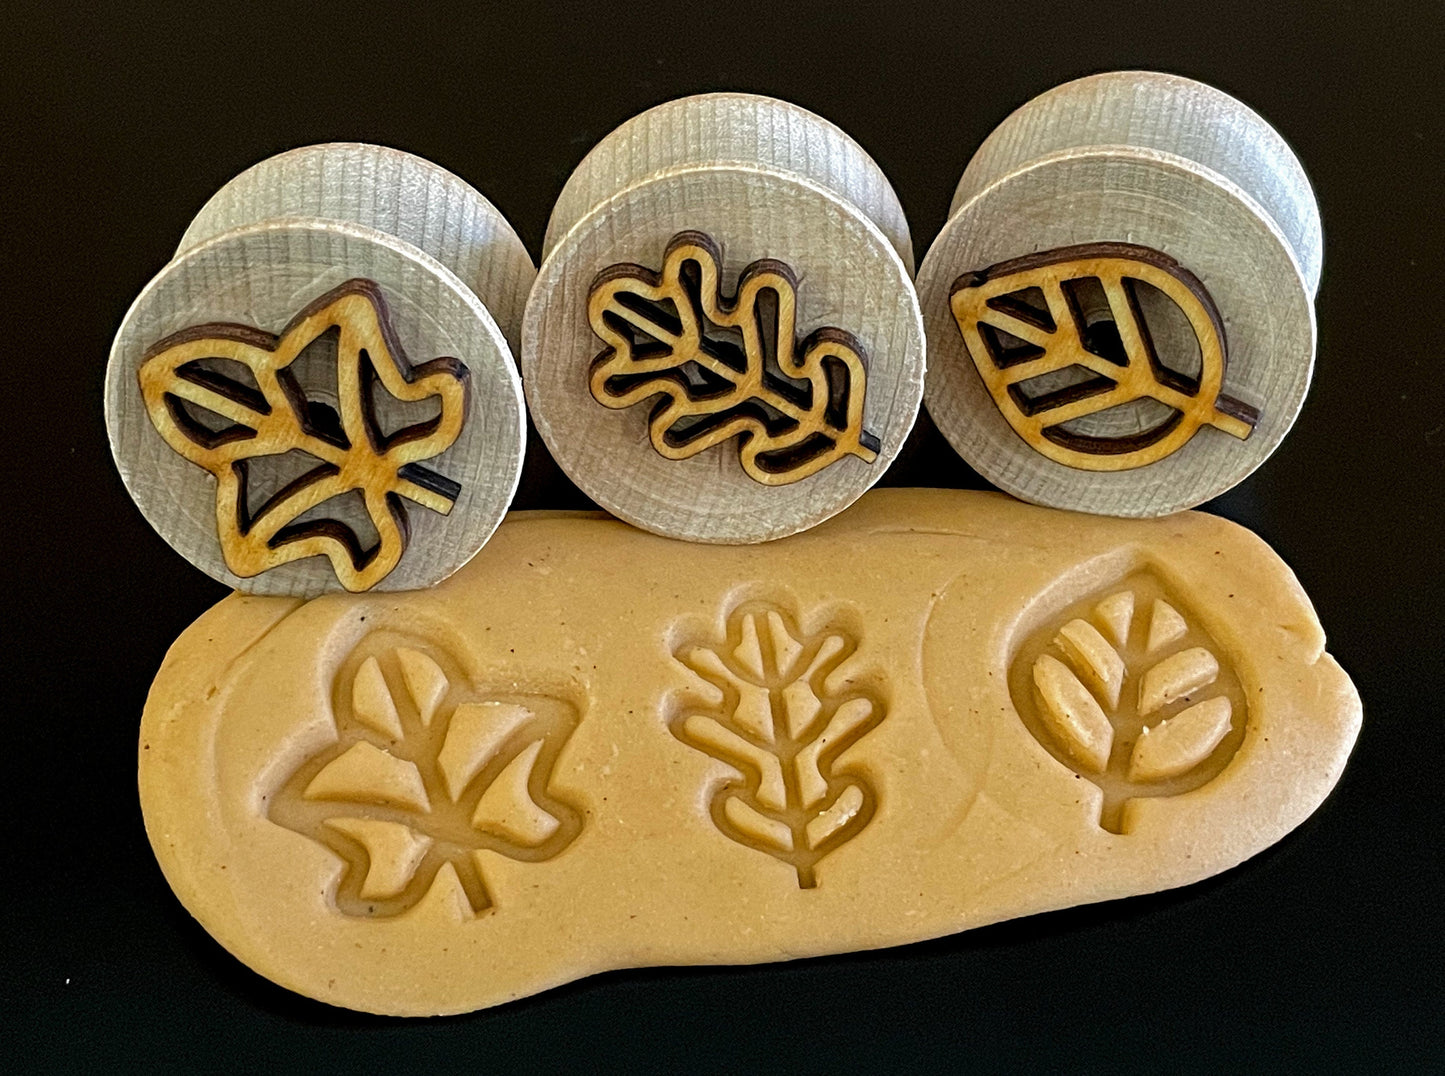 Wooden Fall Leaf Stampers